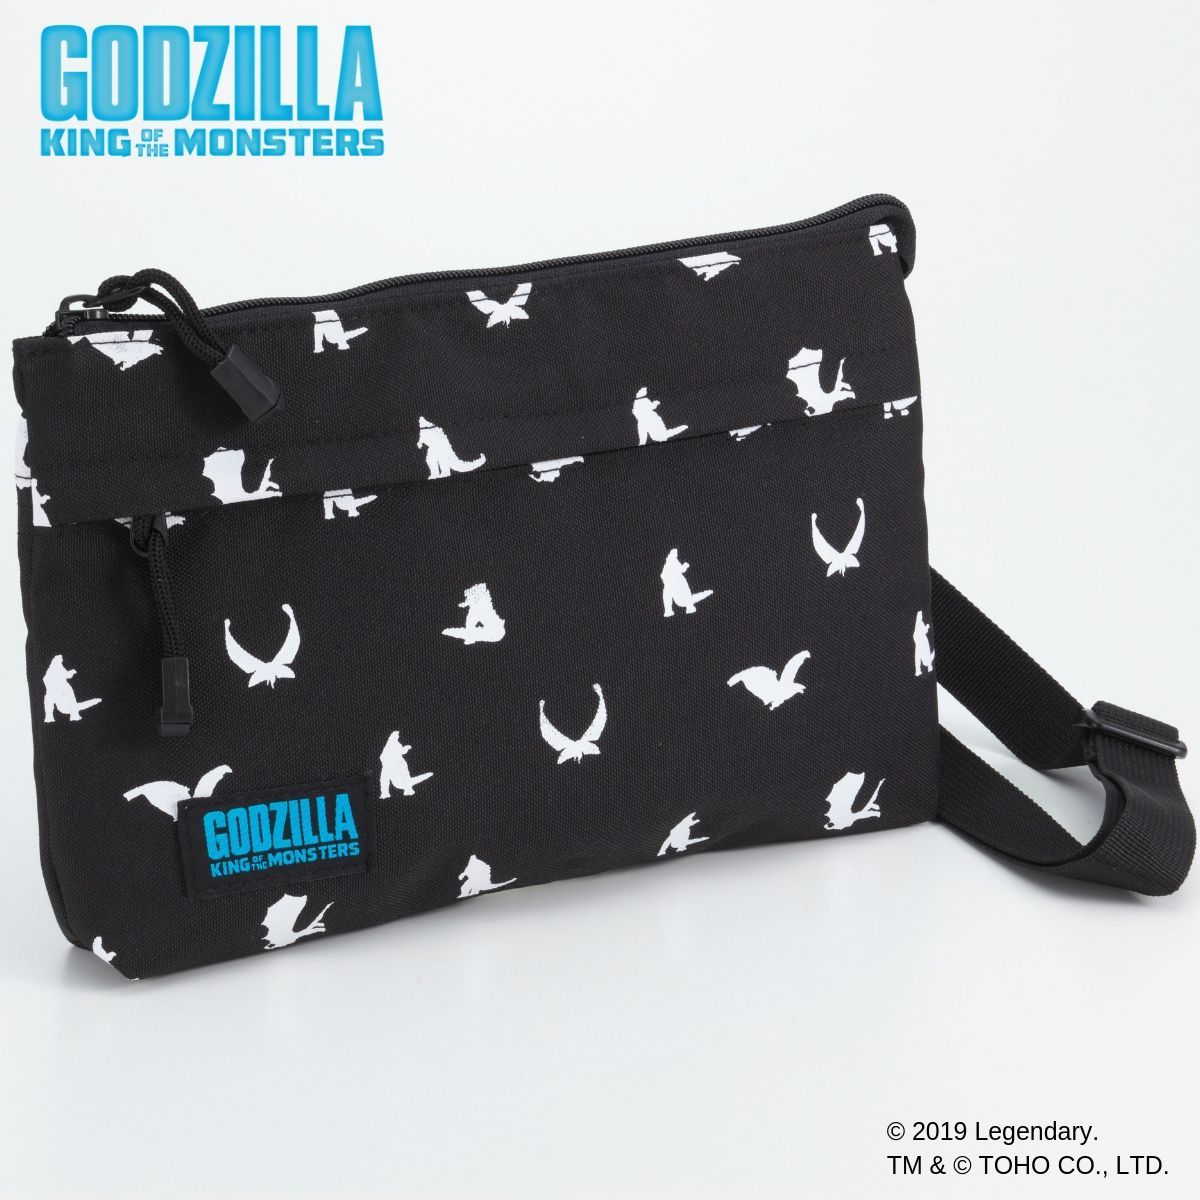 Godzilla King of the Monsters Shoulder Bag - Silhouette Art ver.